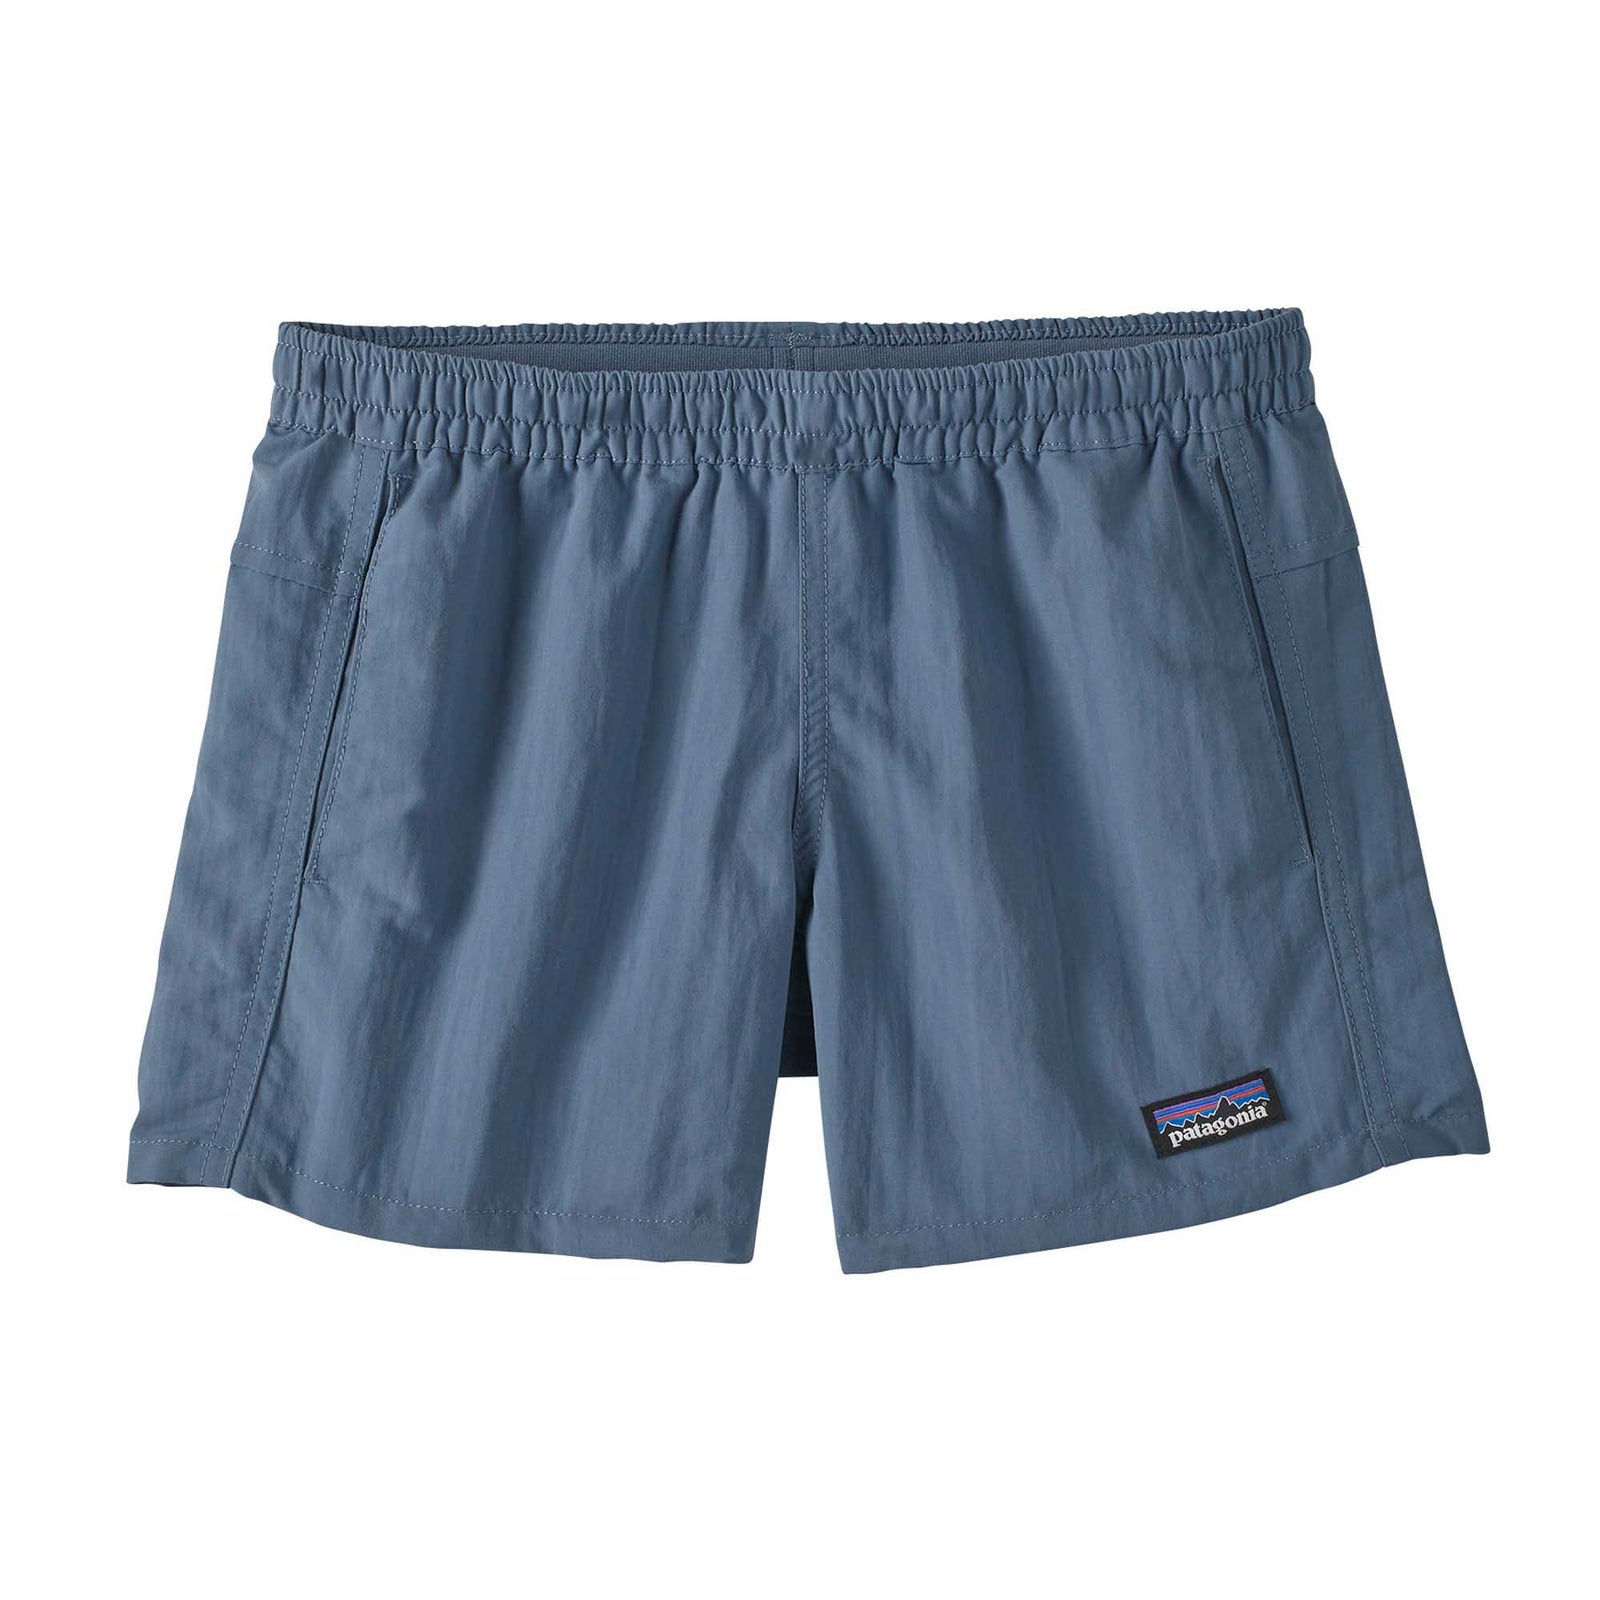 Patagonia Junior's Baggies™ Shorts 4" - Unlined 2024 UTILITY BLUE